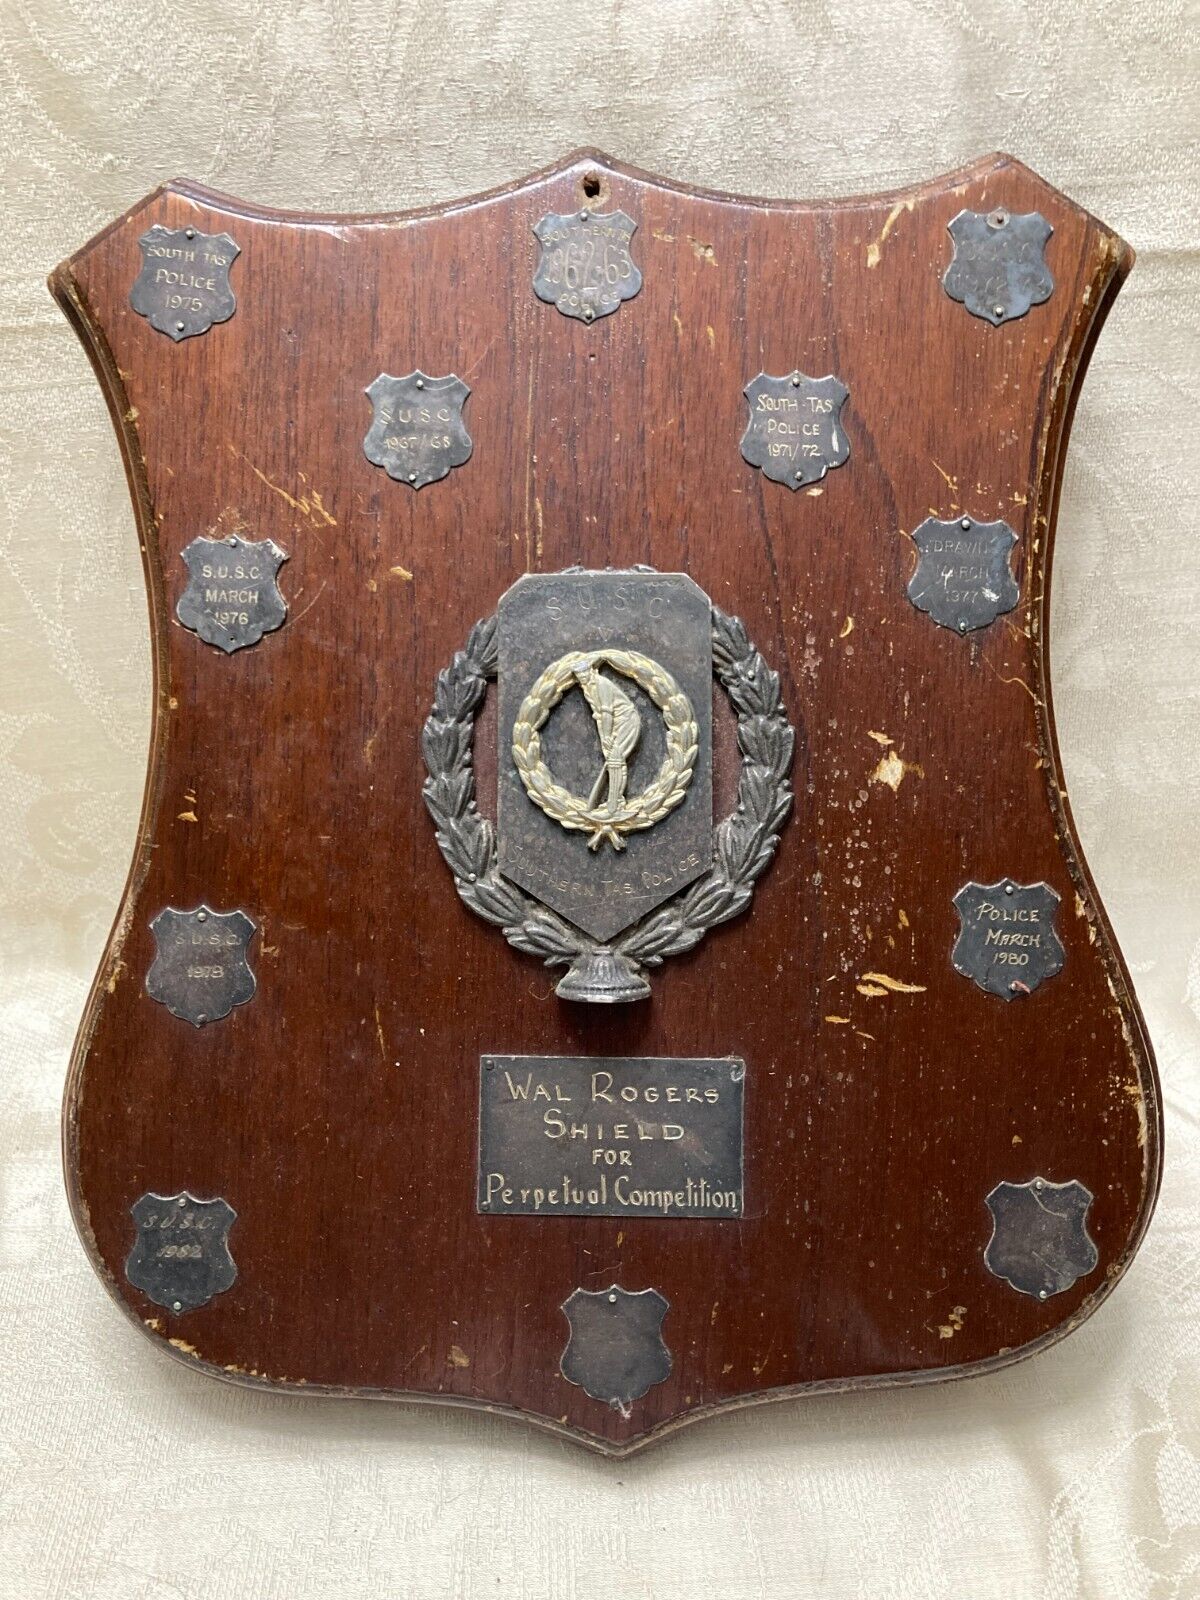 Commemorative Shield for Tasmanian sporting competition 1960's-1980's